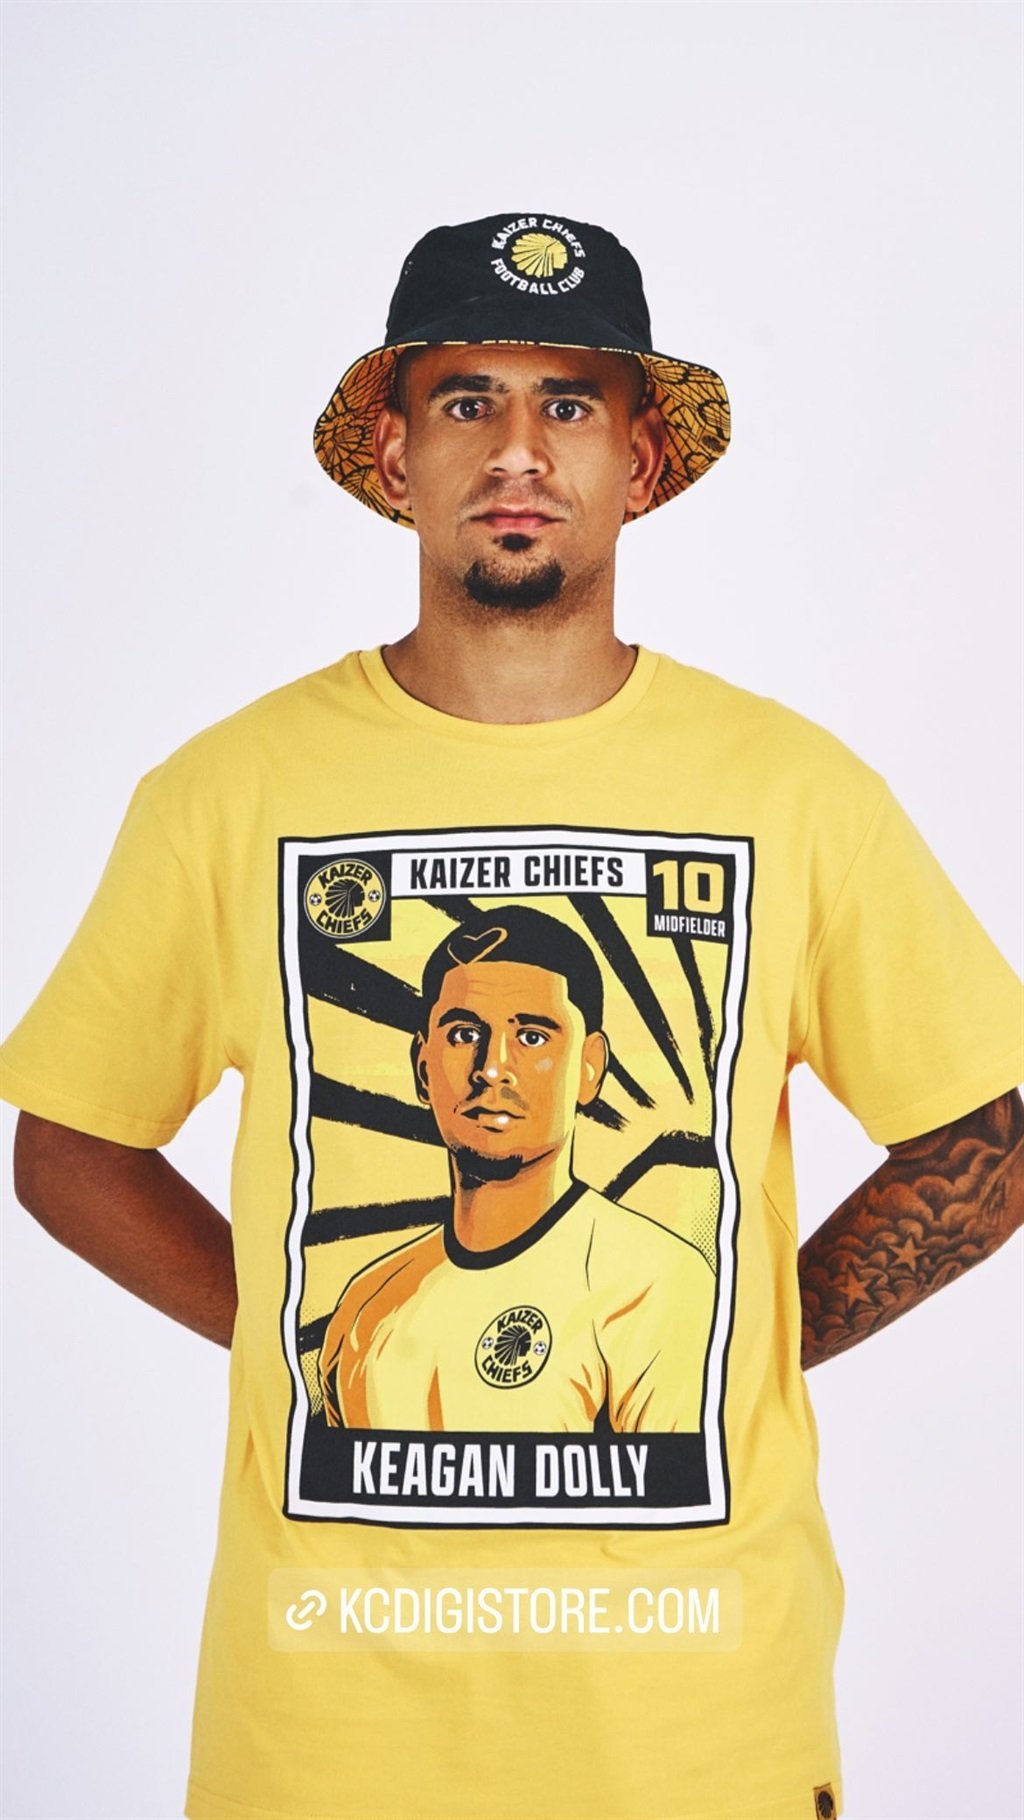 Kaizer Chiefs has released its Urban Edition Summe